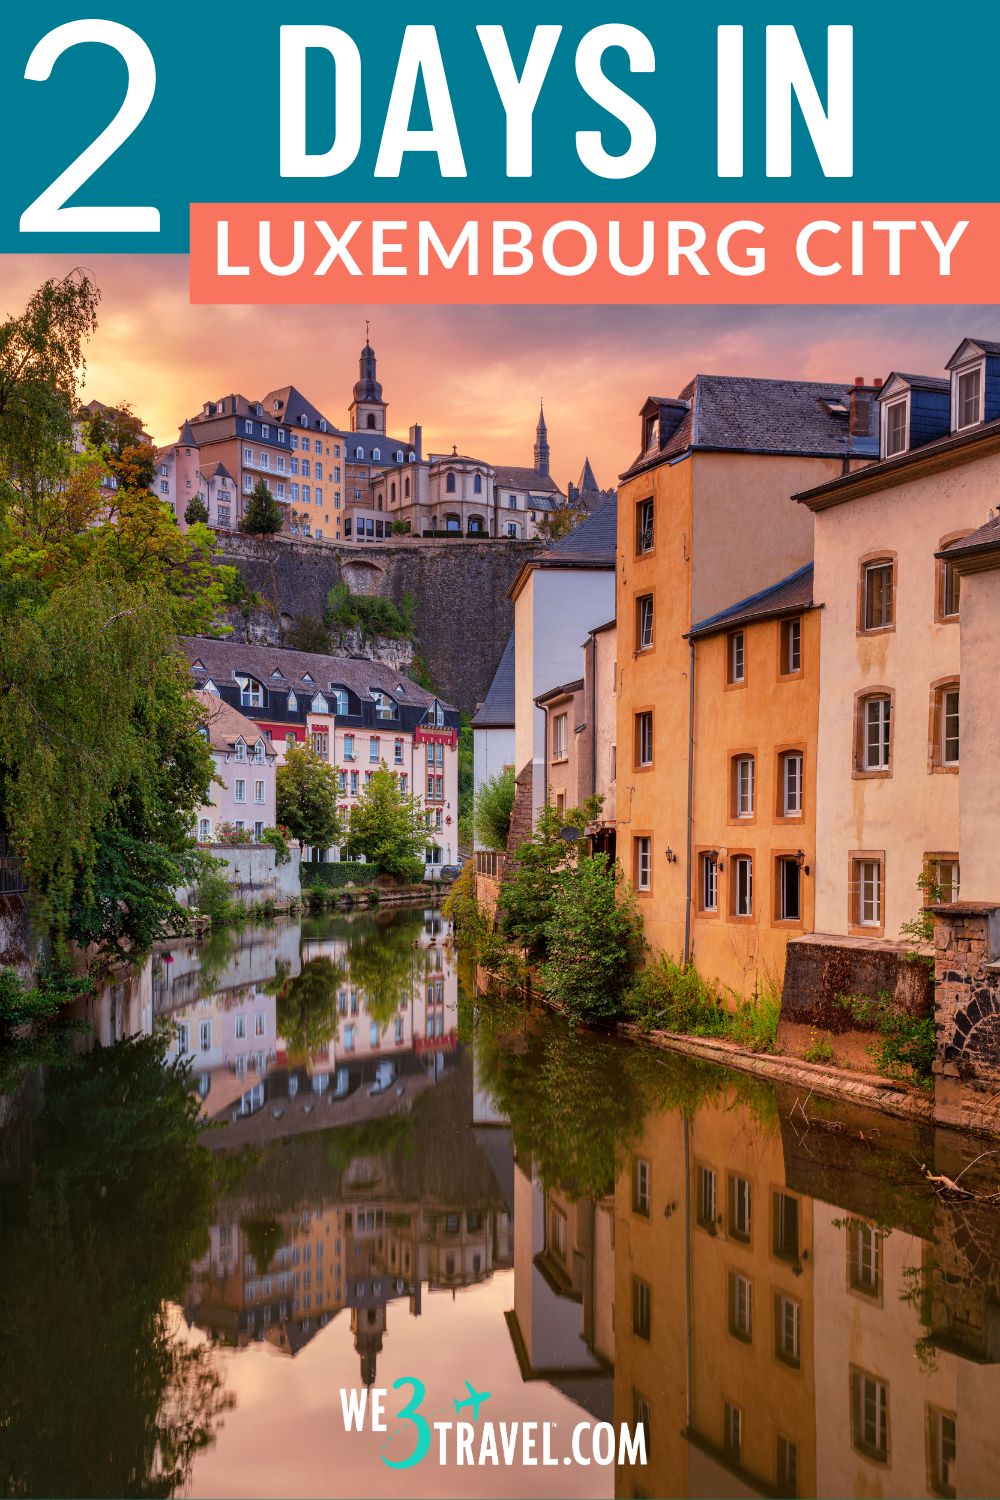 Use this 2 days in Luxembourg itinerary to discover the best of the city, from exploring the medieval Grund district to visiting the Grand Ducal Palace, you'll experience the city's rich history and modern culture.